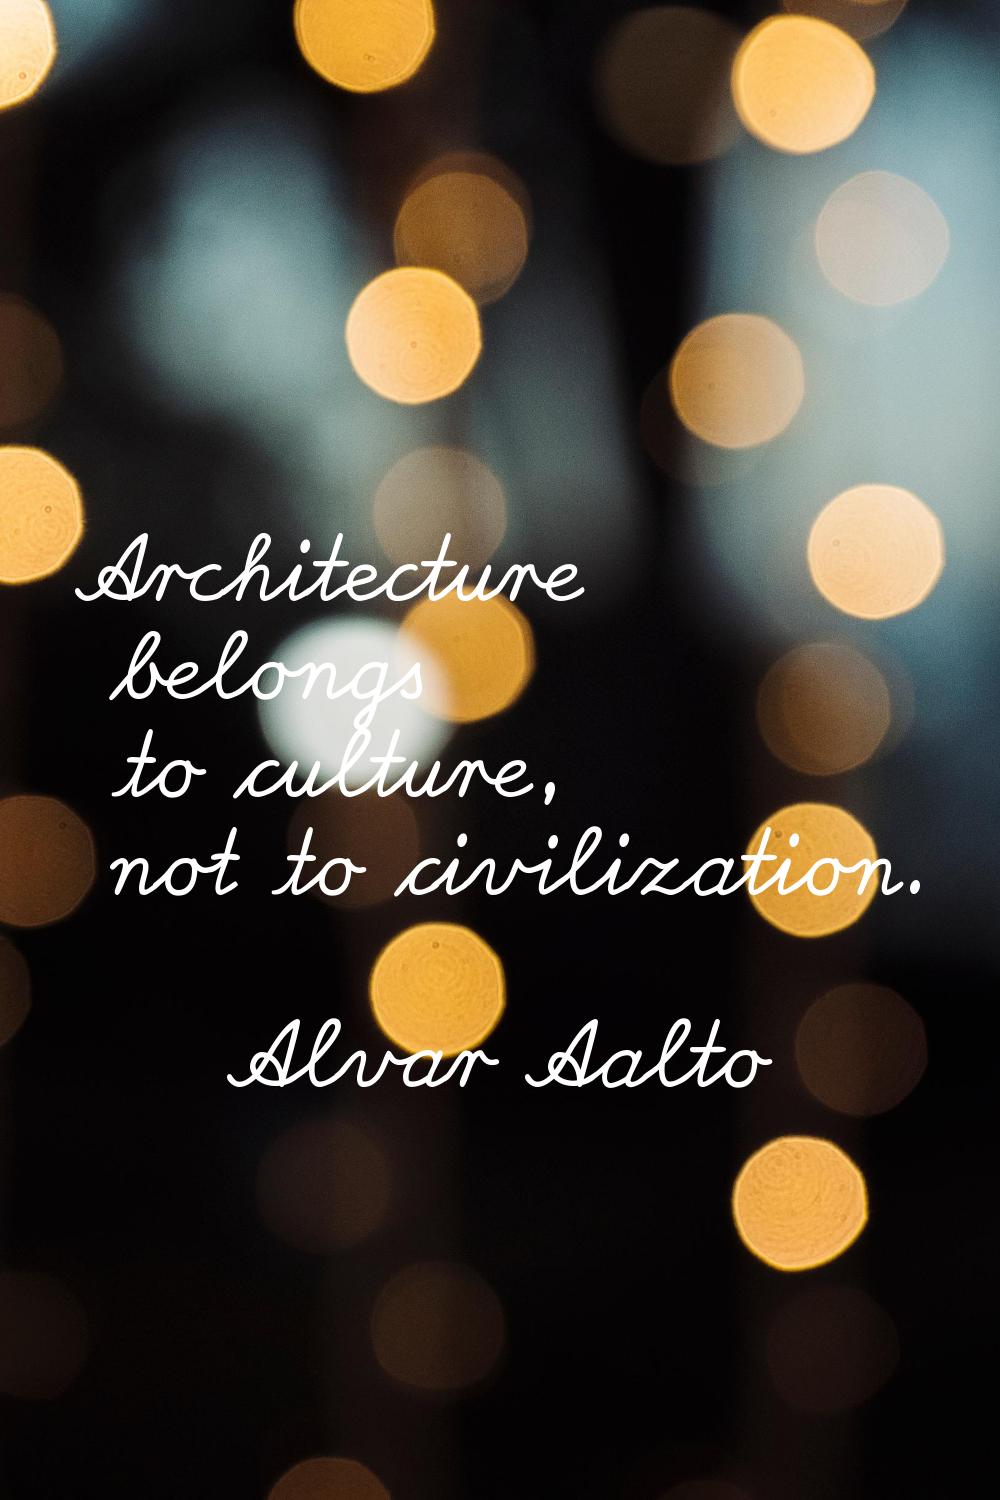 Architecture belongs to culture, not to civilization.